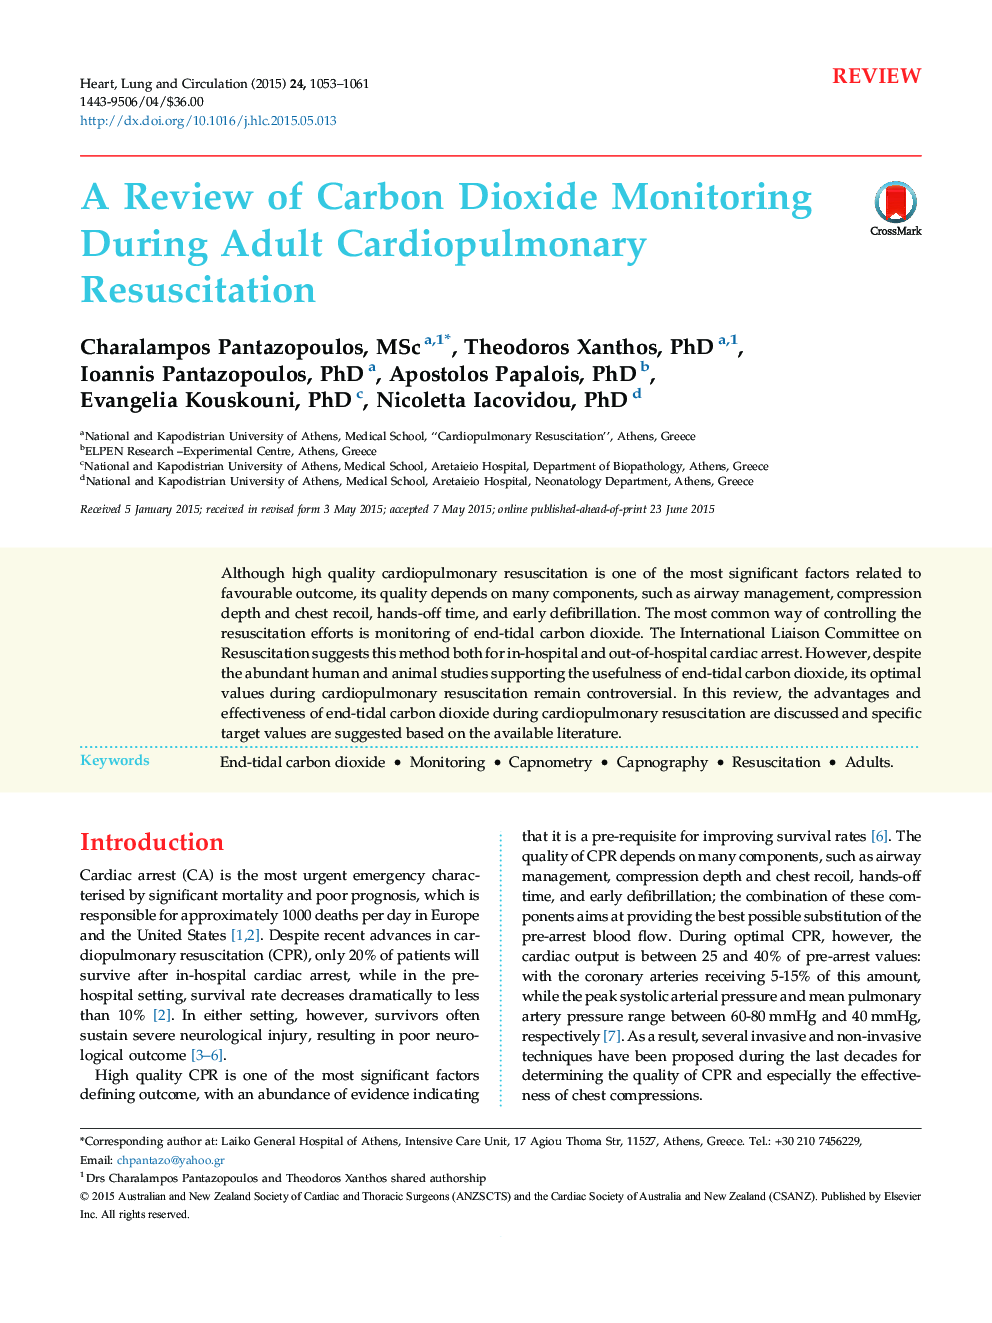 A Review of Carbon Dioxide Monitoring During Adult Cardiopulmonary Resuscitation